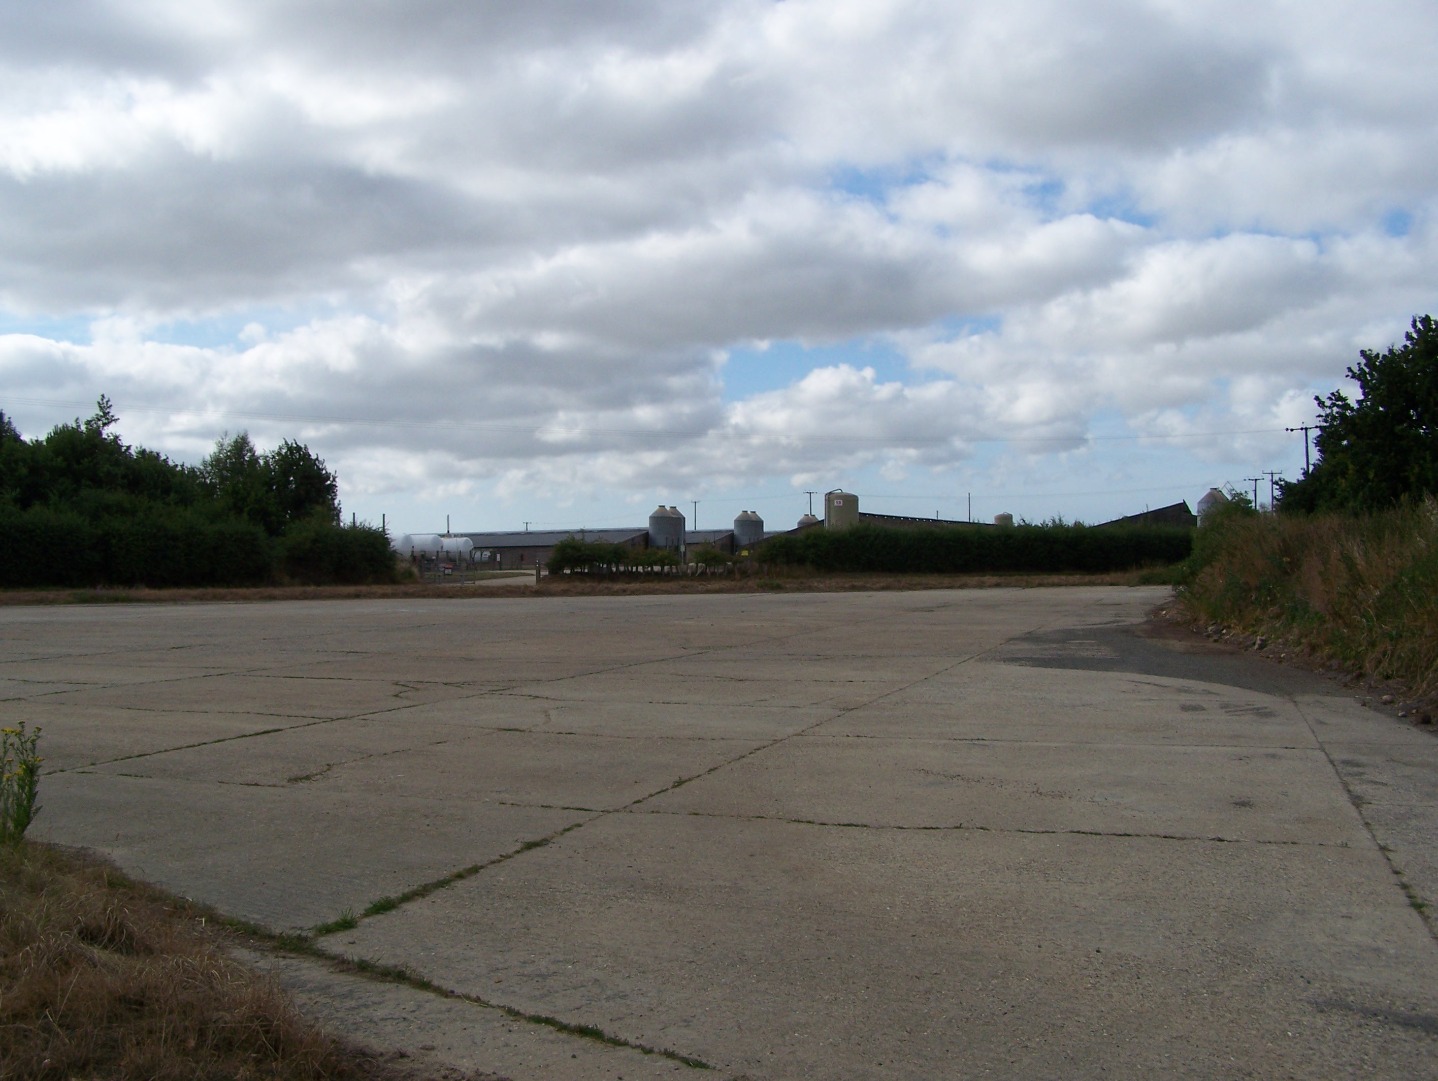 007-17:35 runway of 1400 yards in length at south-east end, looking approximately northwards 14:7:06.JPG